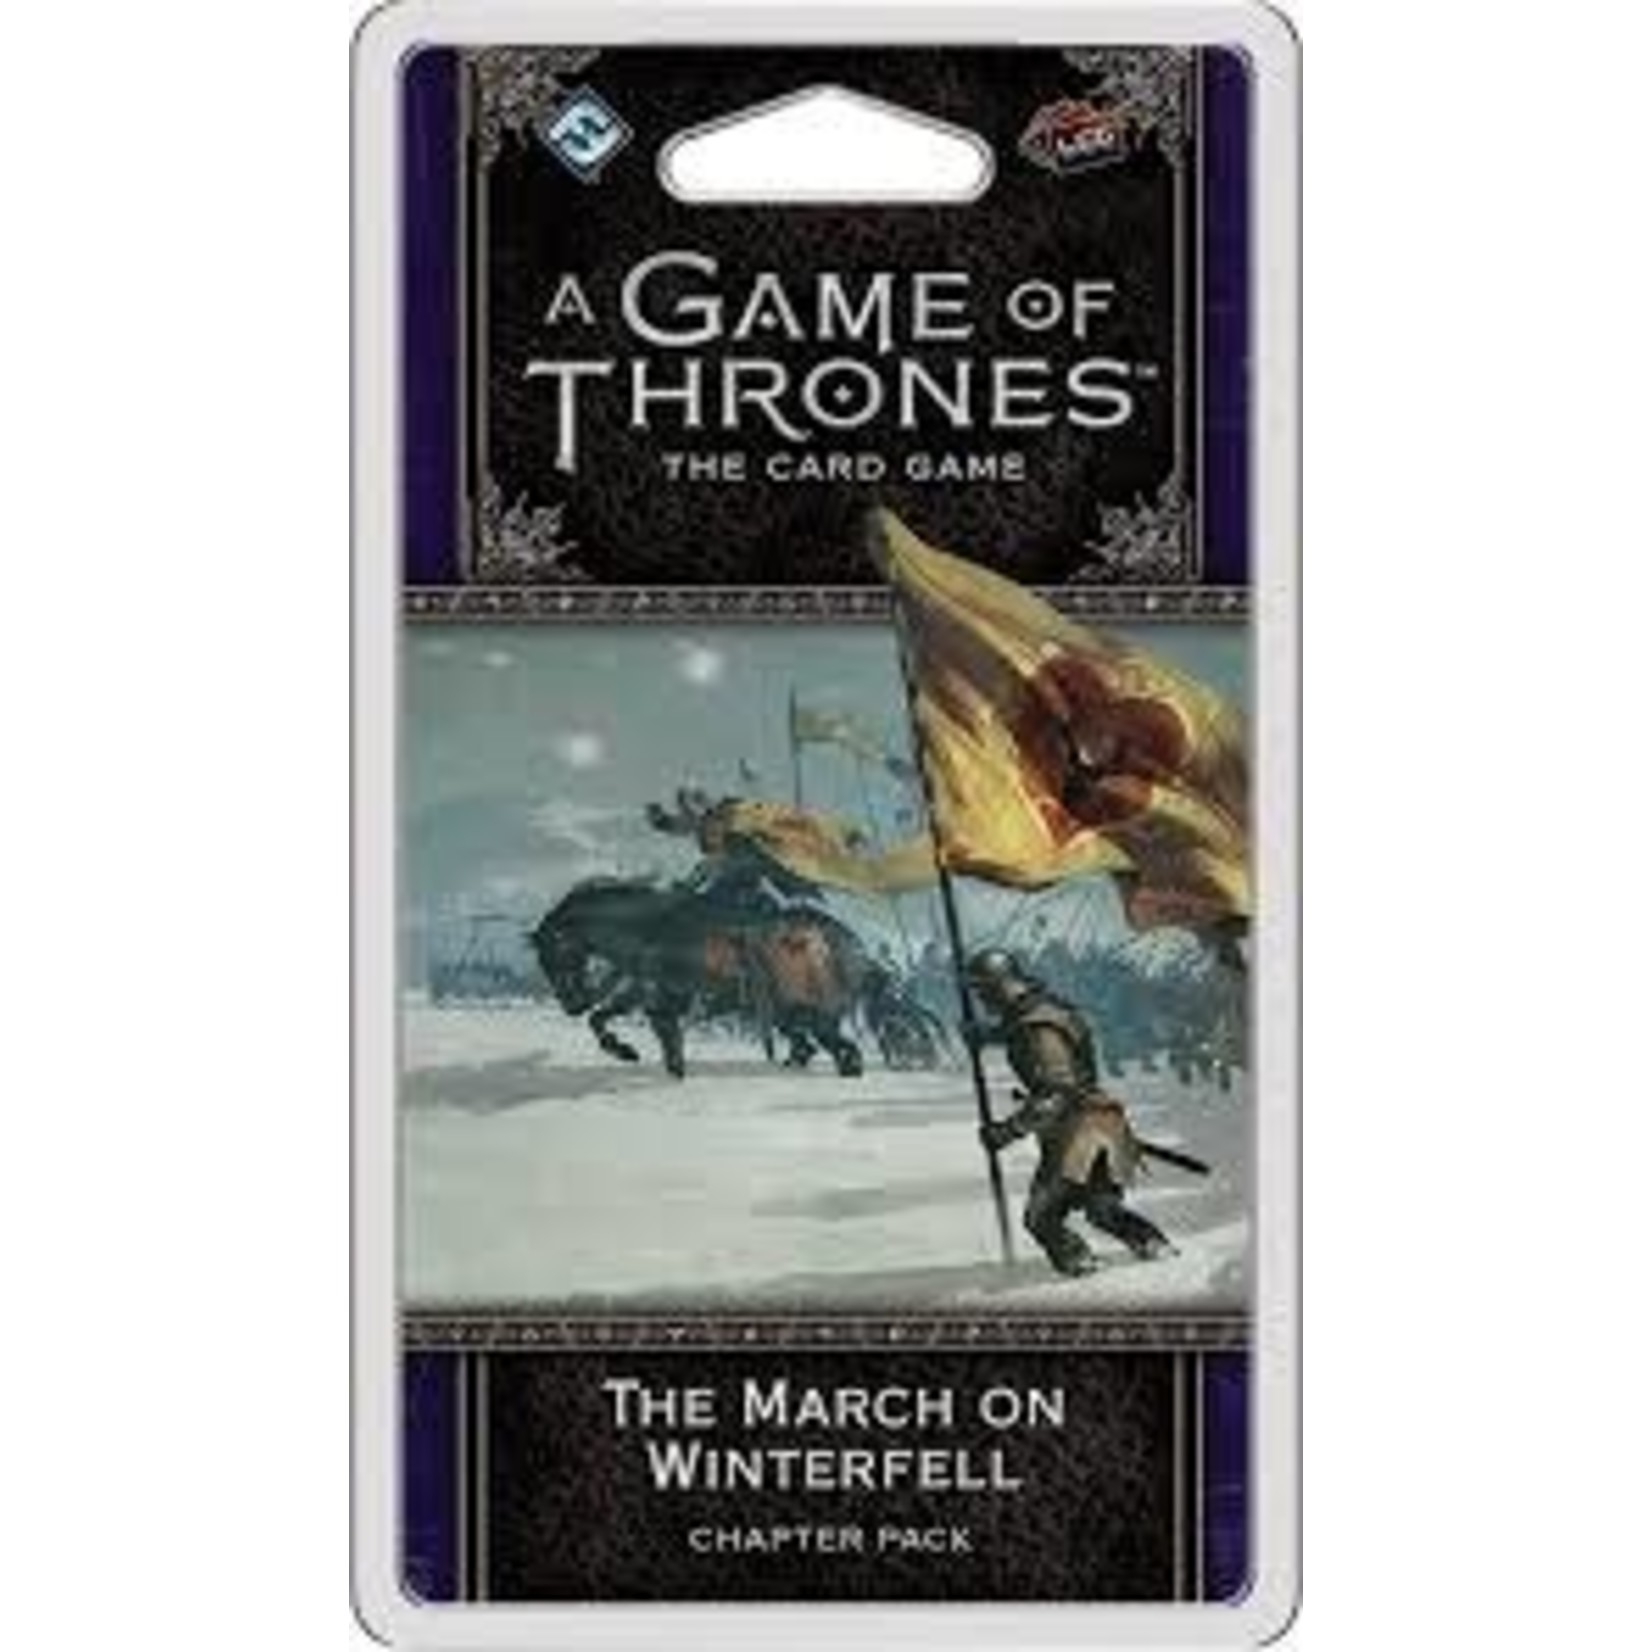 A Game Of Thrones 2E LCG: The March on Winterfell Chapter Pack